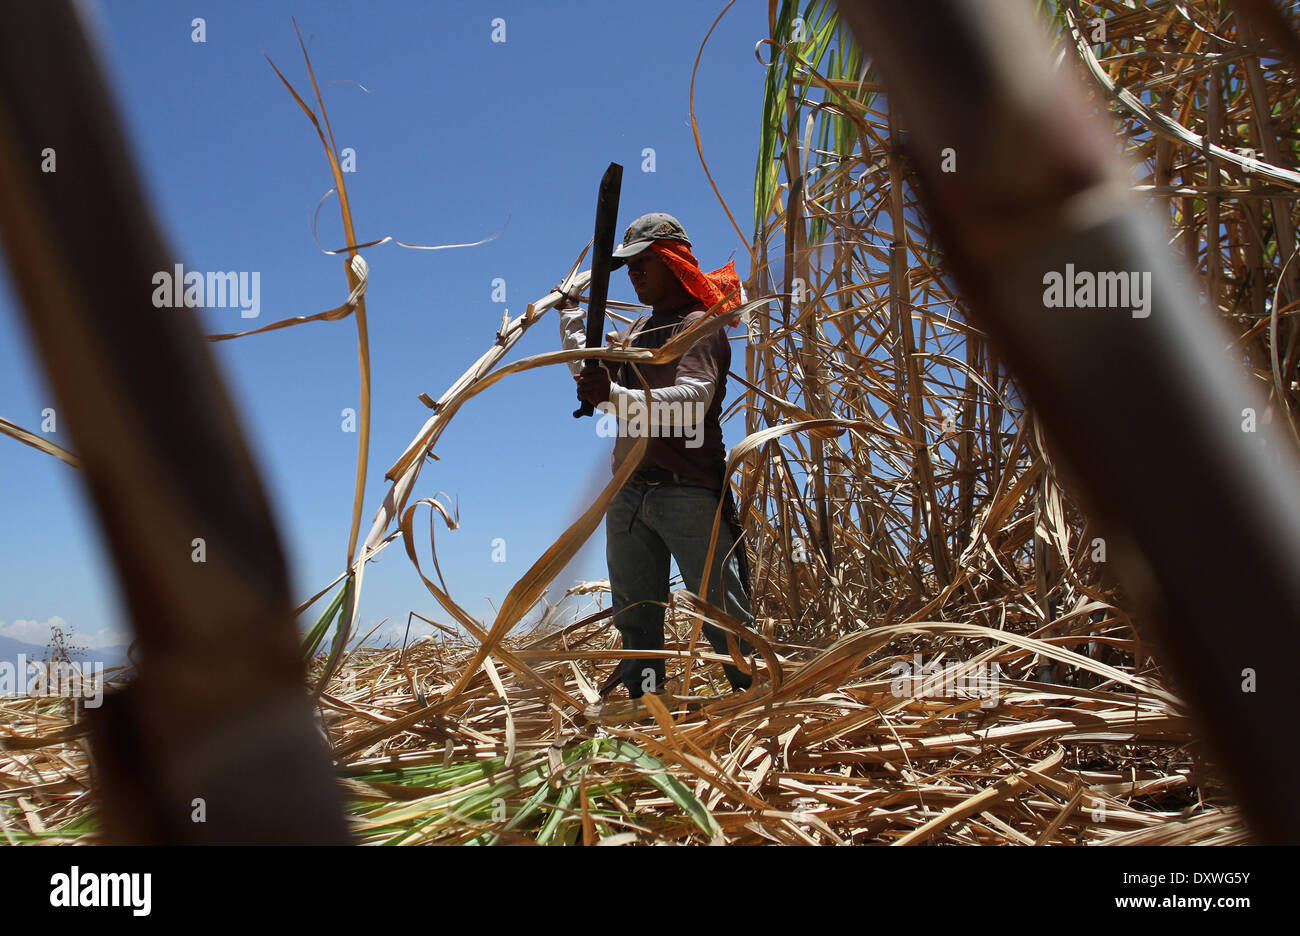 San Ramon, Costa Rica. 31st Mar, 2014. A worker reaps sugarcane in a plantation of San Ramon district, 55km from San Jose, capital of Costa Rica, on March 31, 2014. Sugar industry is one of the most important industries in Costa Rica, with over 48,000 hectares of planted sugarcane. © Kent Gilbert/Xinhua/Alamy Live News Stock Photo